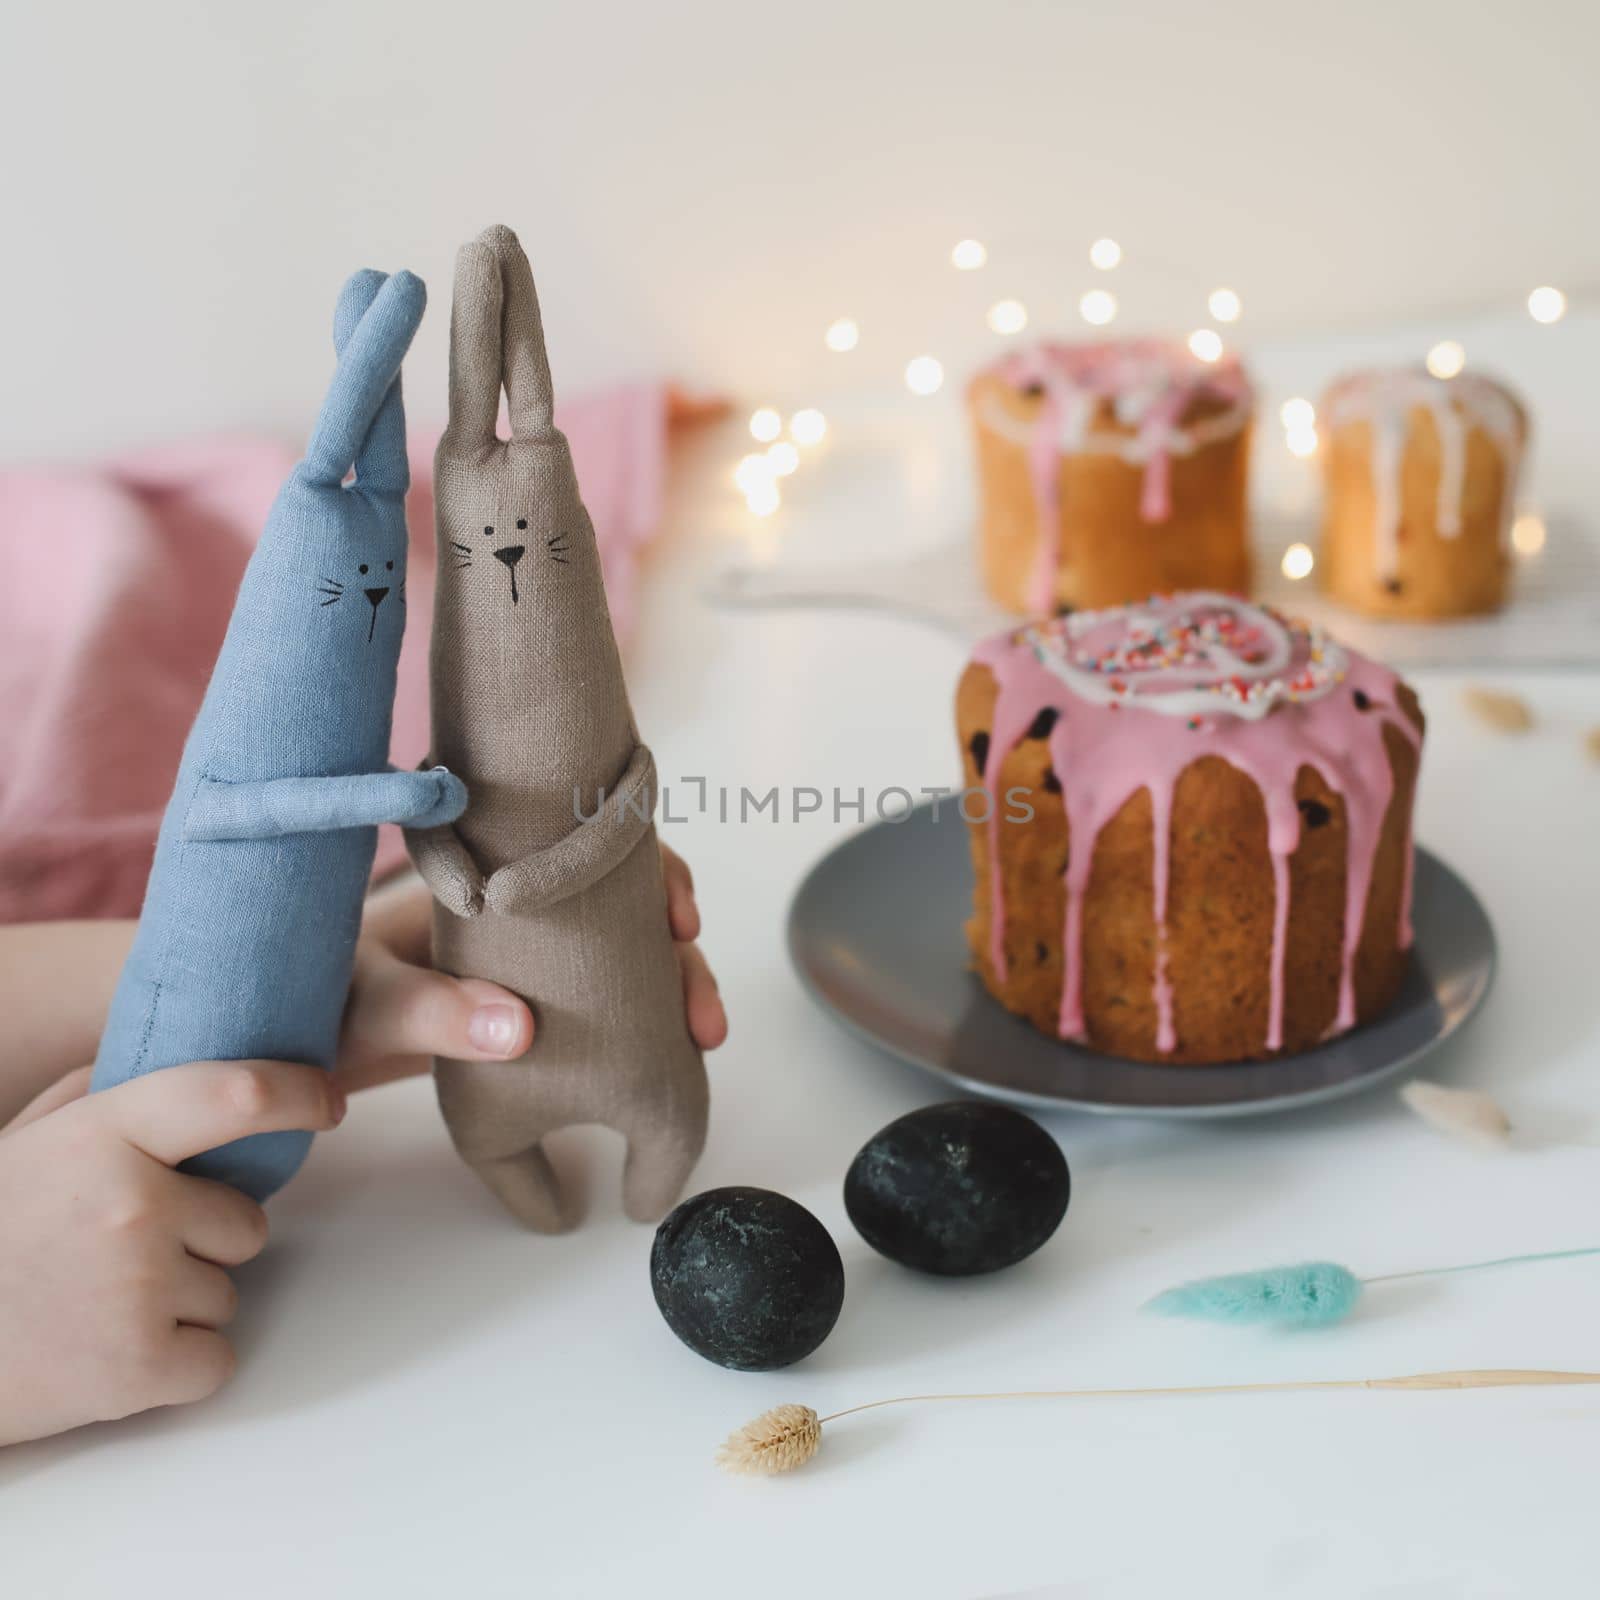 Easter cake, colorful eggs and rabbit toy. Happy Easter holiday concept. festive spring season.